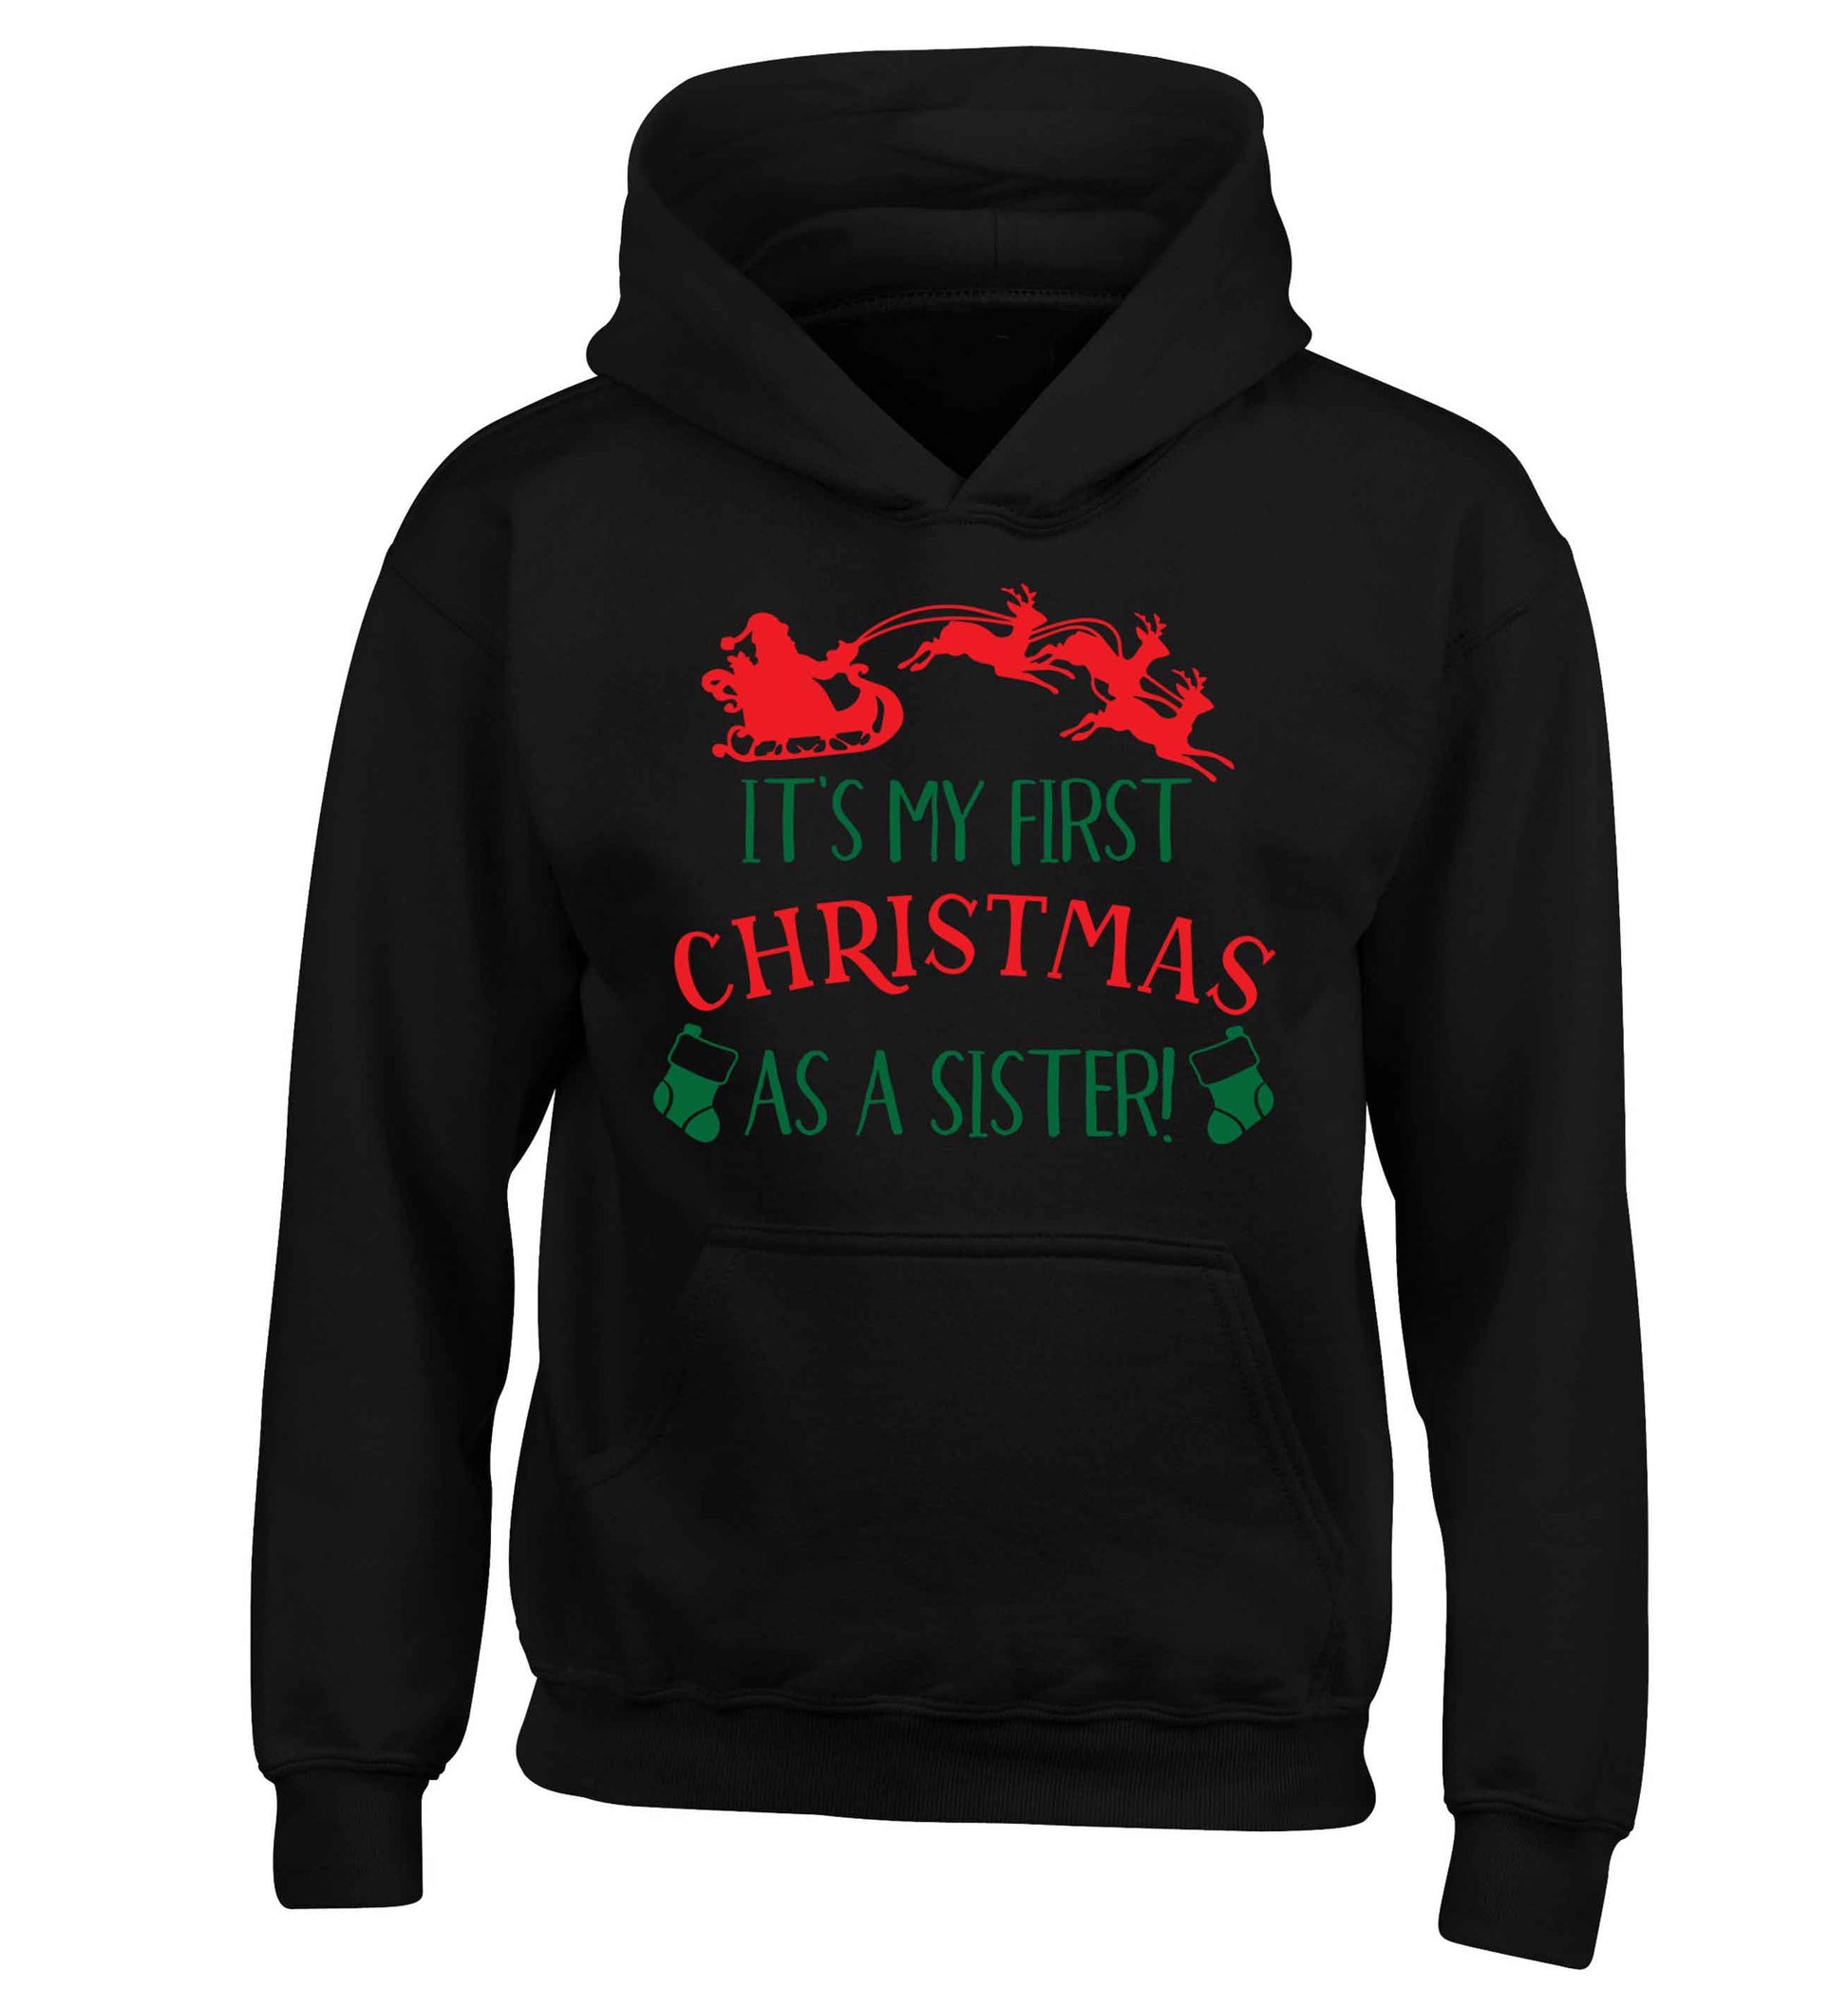 It's my first Christmas as a sister! children's black hoodie 12-13 Years